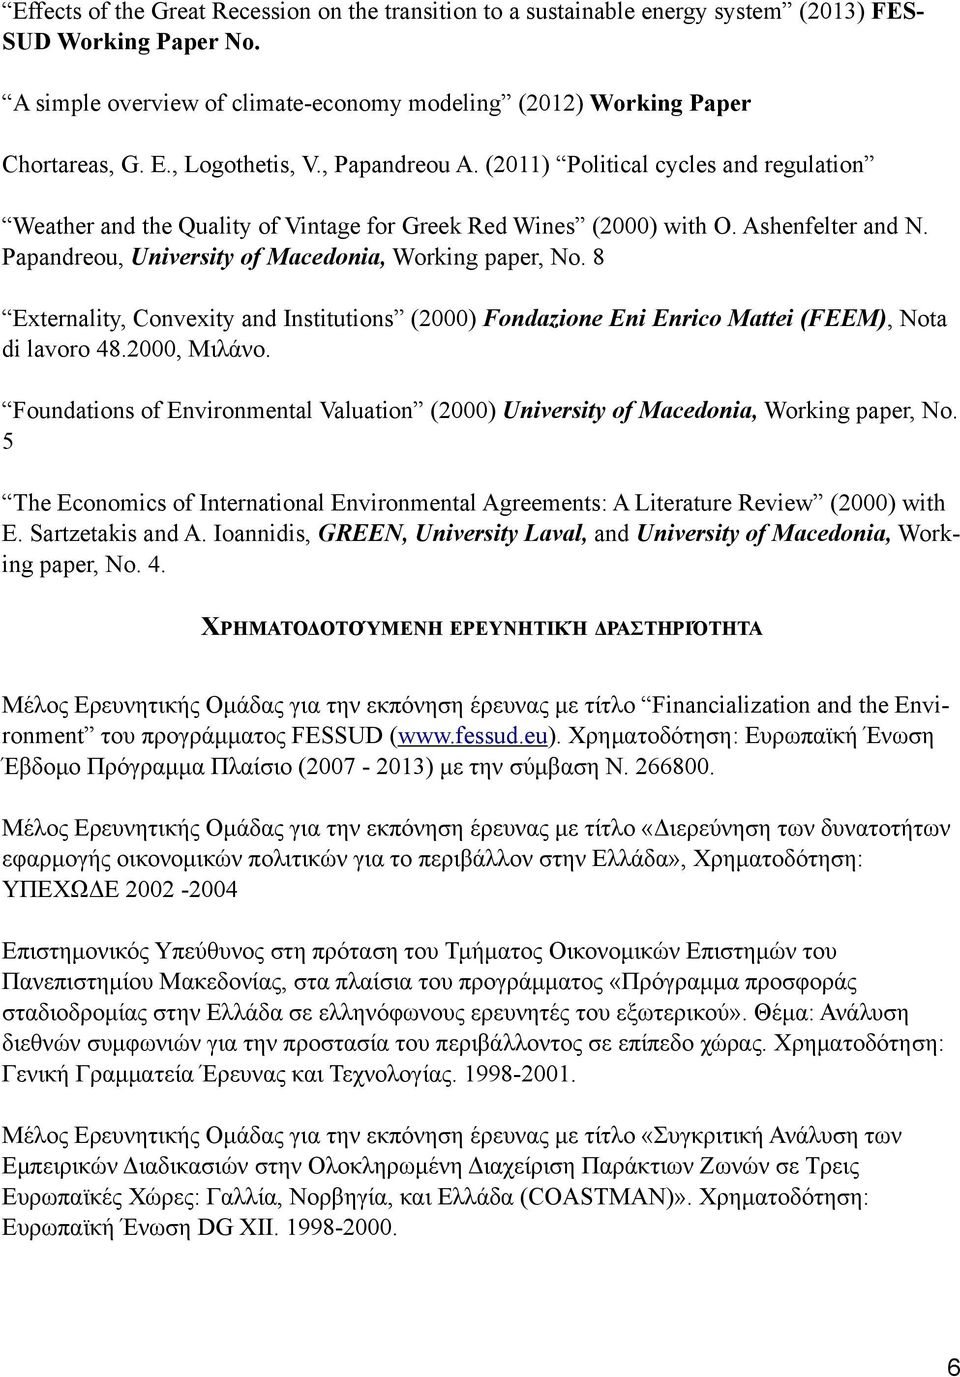 Papandreou, University of Macedonia, Working paper, Νο. 8 Externality, Convexity and Institutions (2000) Fondazione Eni Enrico Mattei (FEEM), Nota di lavoro 48.2000, Μιλάνο.